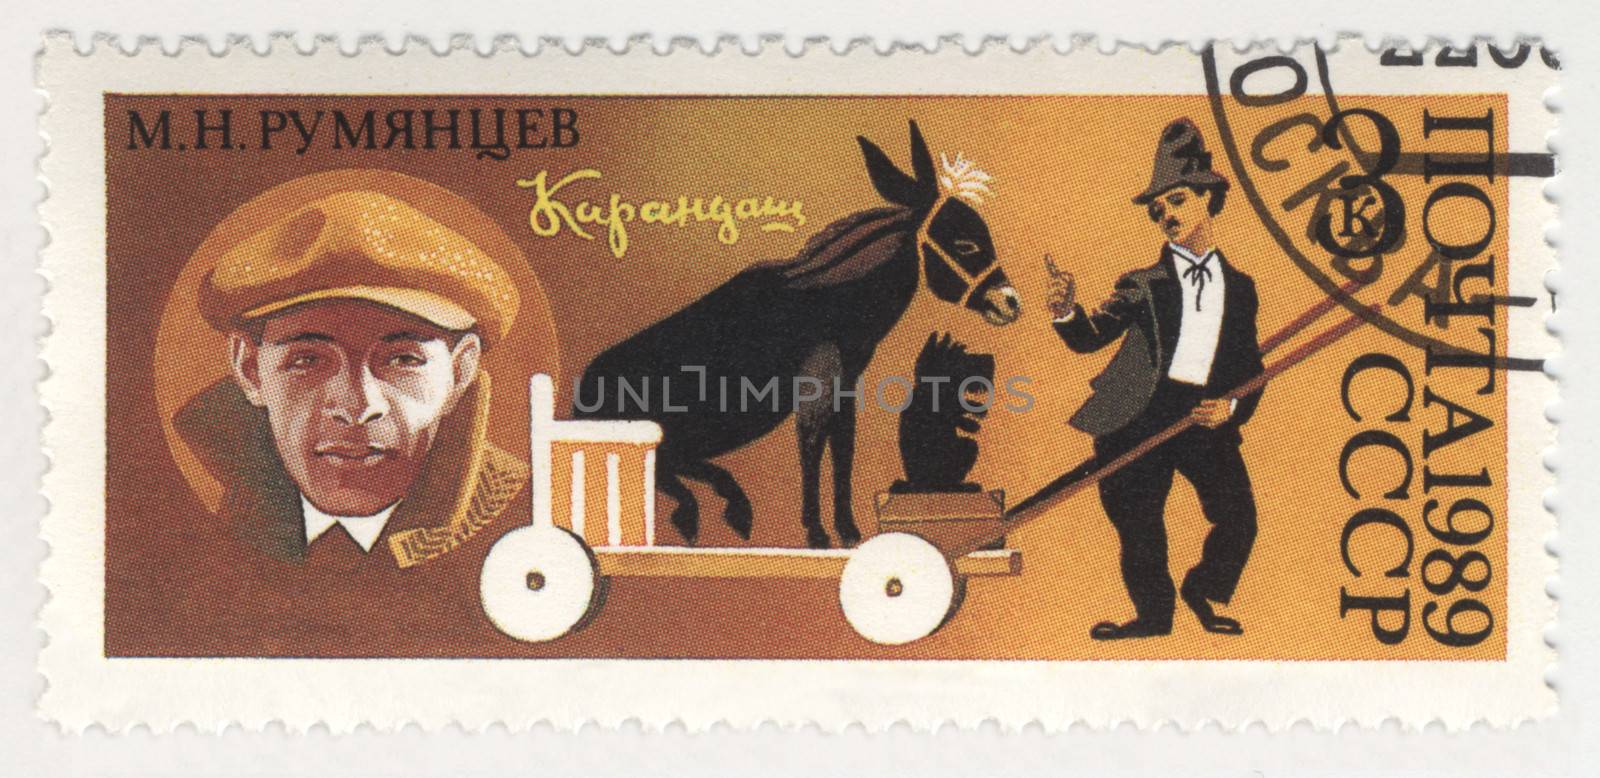 USSR - CIRCA 1989: stamp printed in USSR, dedicated to the circus, shows Soviet clown Mikhail Rumyantsev (Pencil), circa 1989